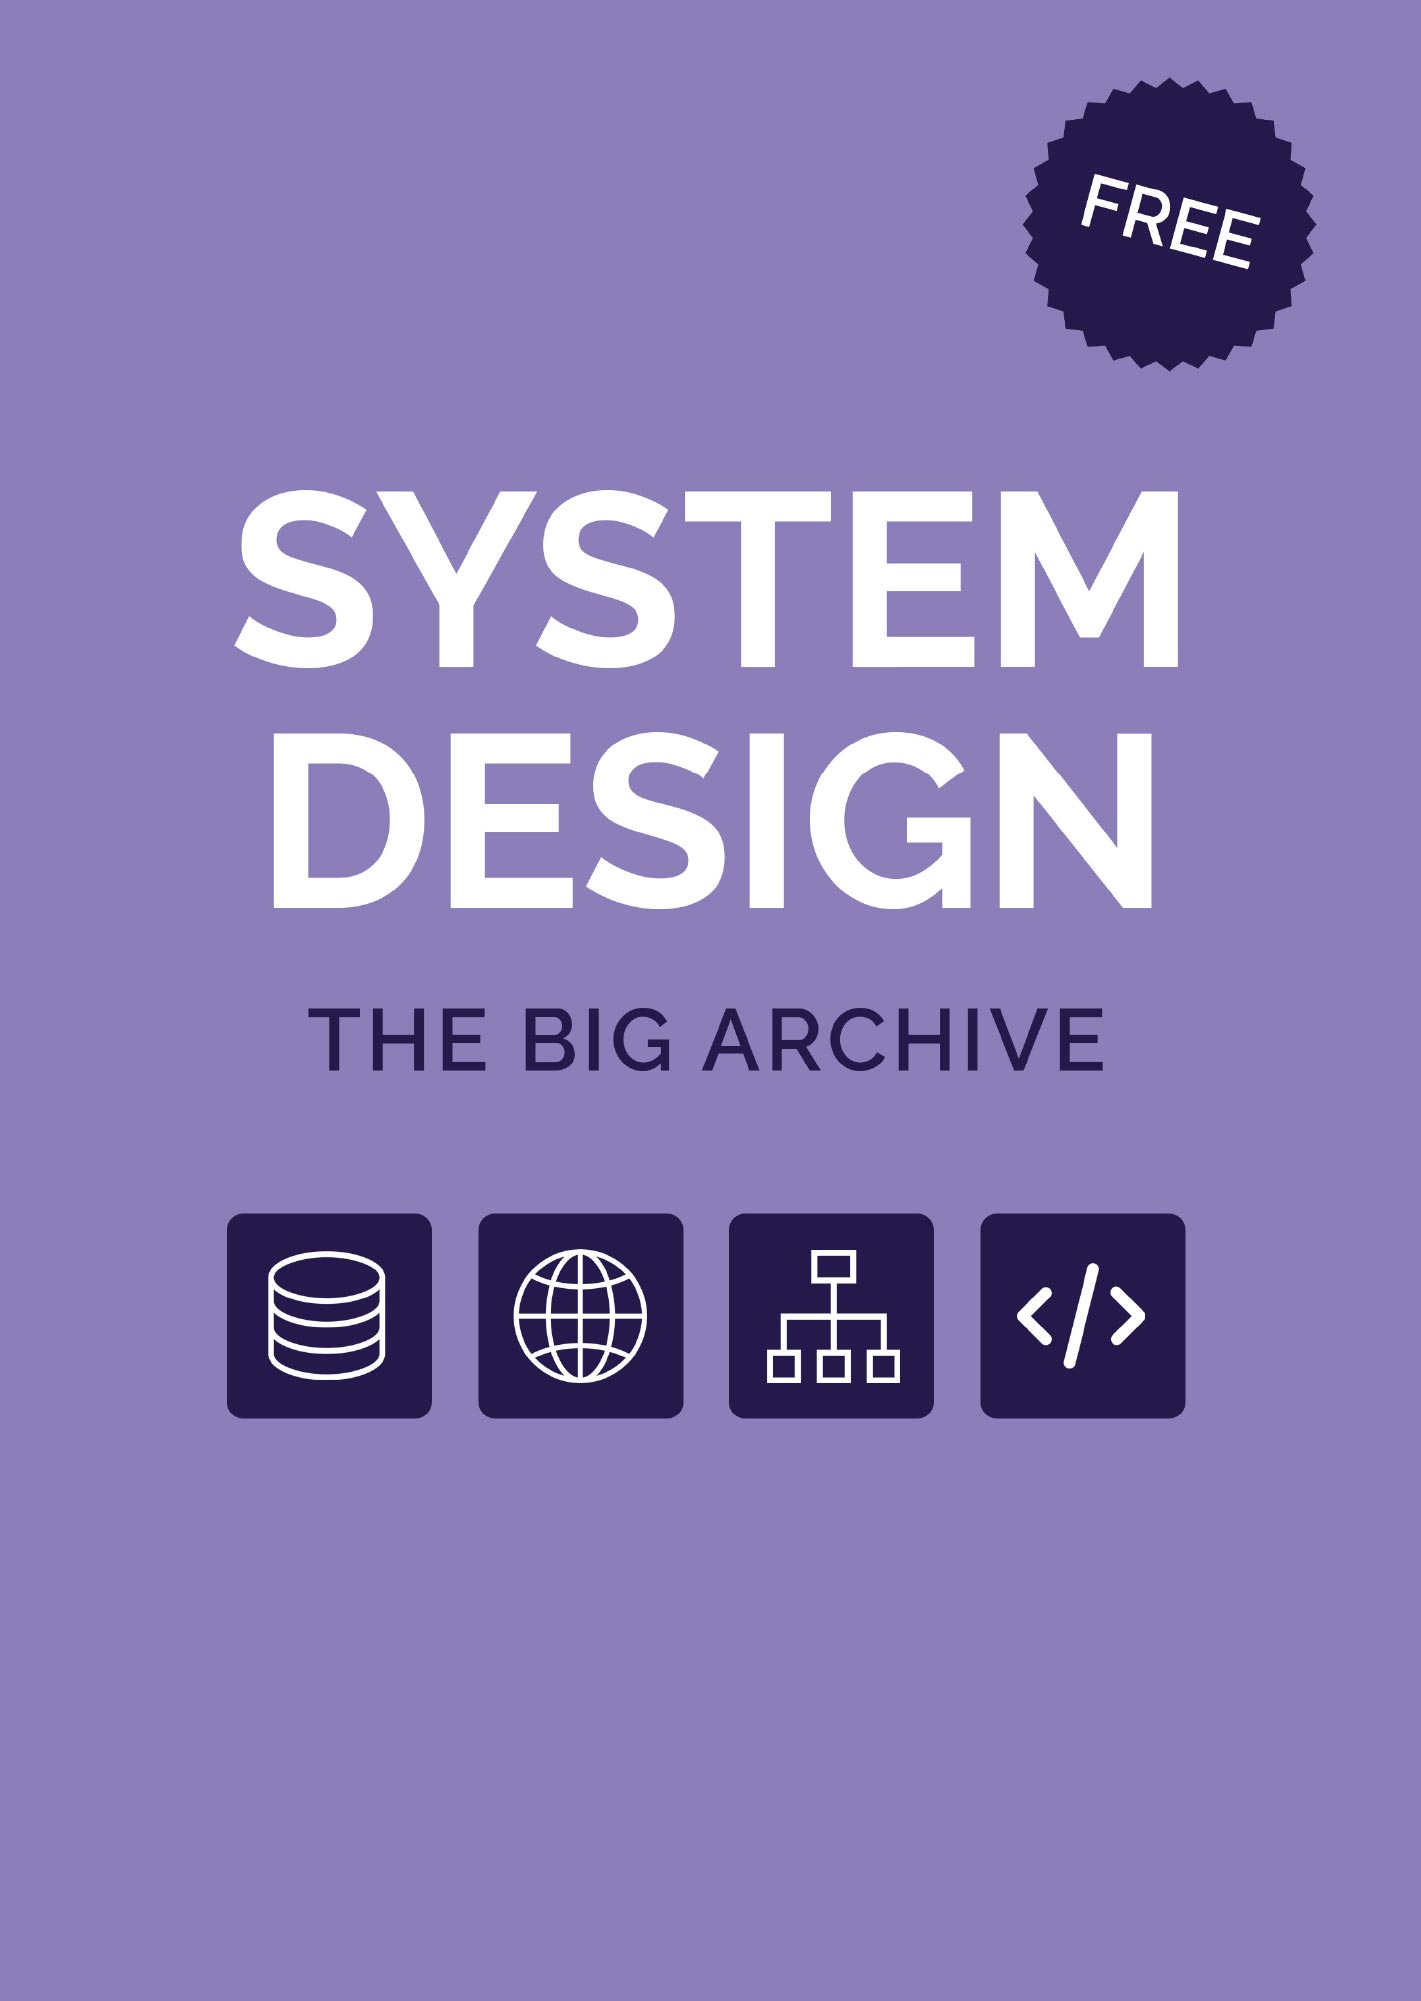 System Design - The Big Archive